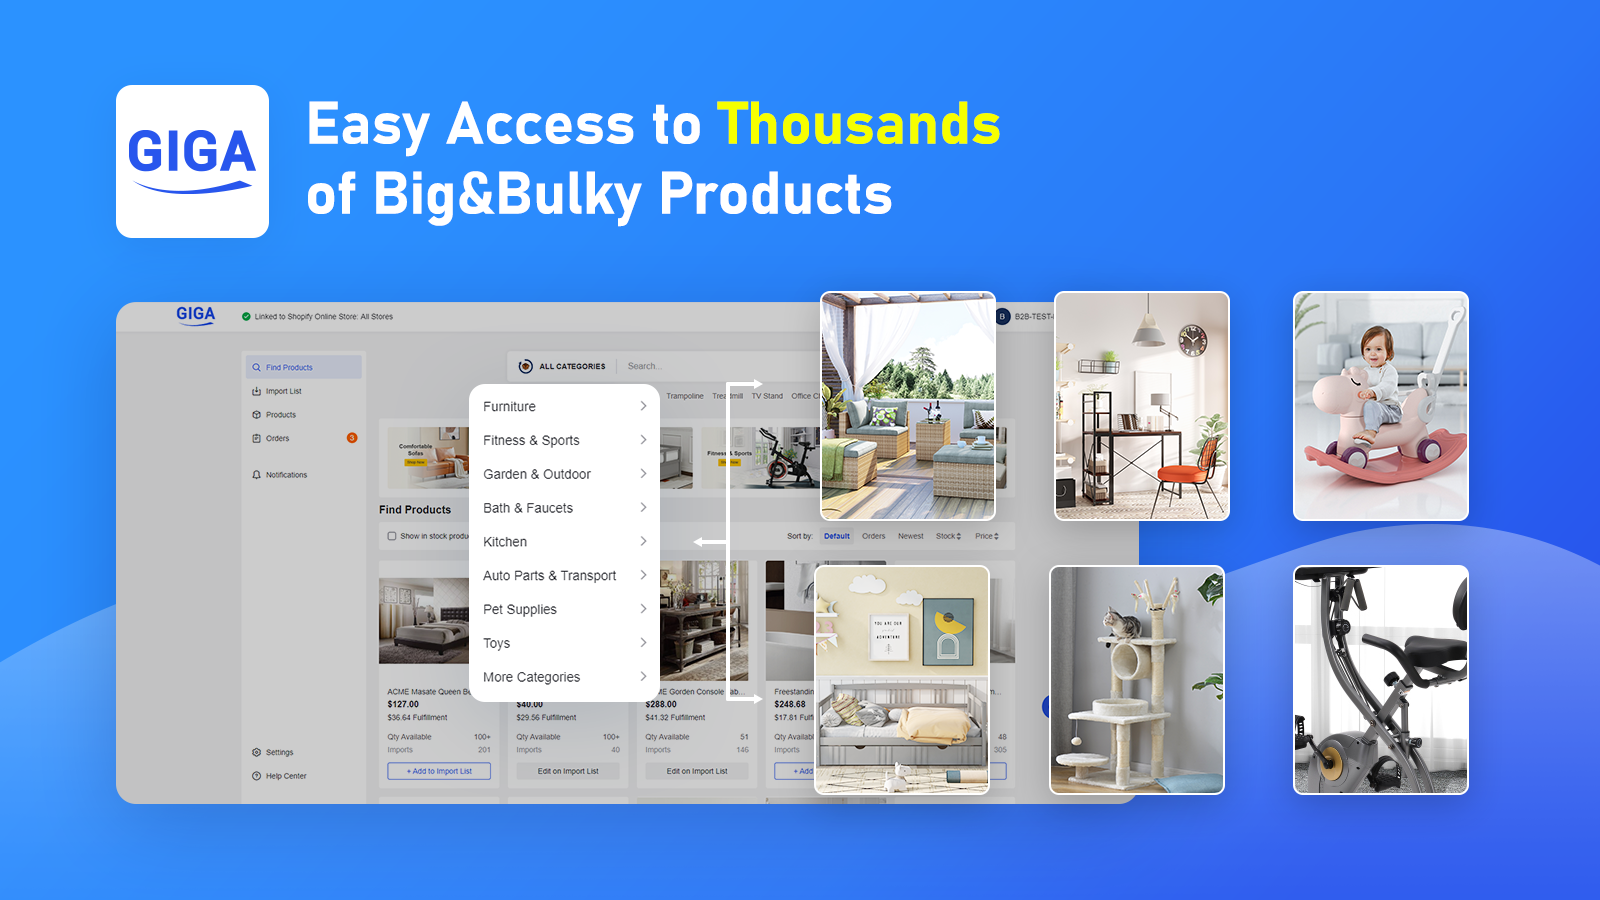 Easy Access to Thousands of Big & Bulky Products